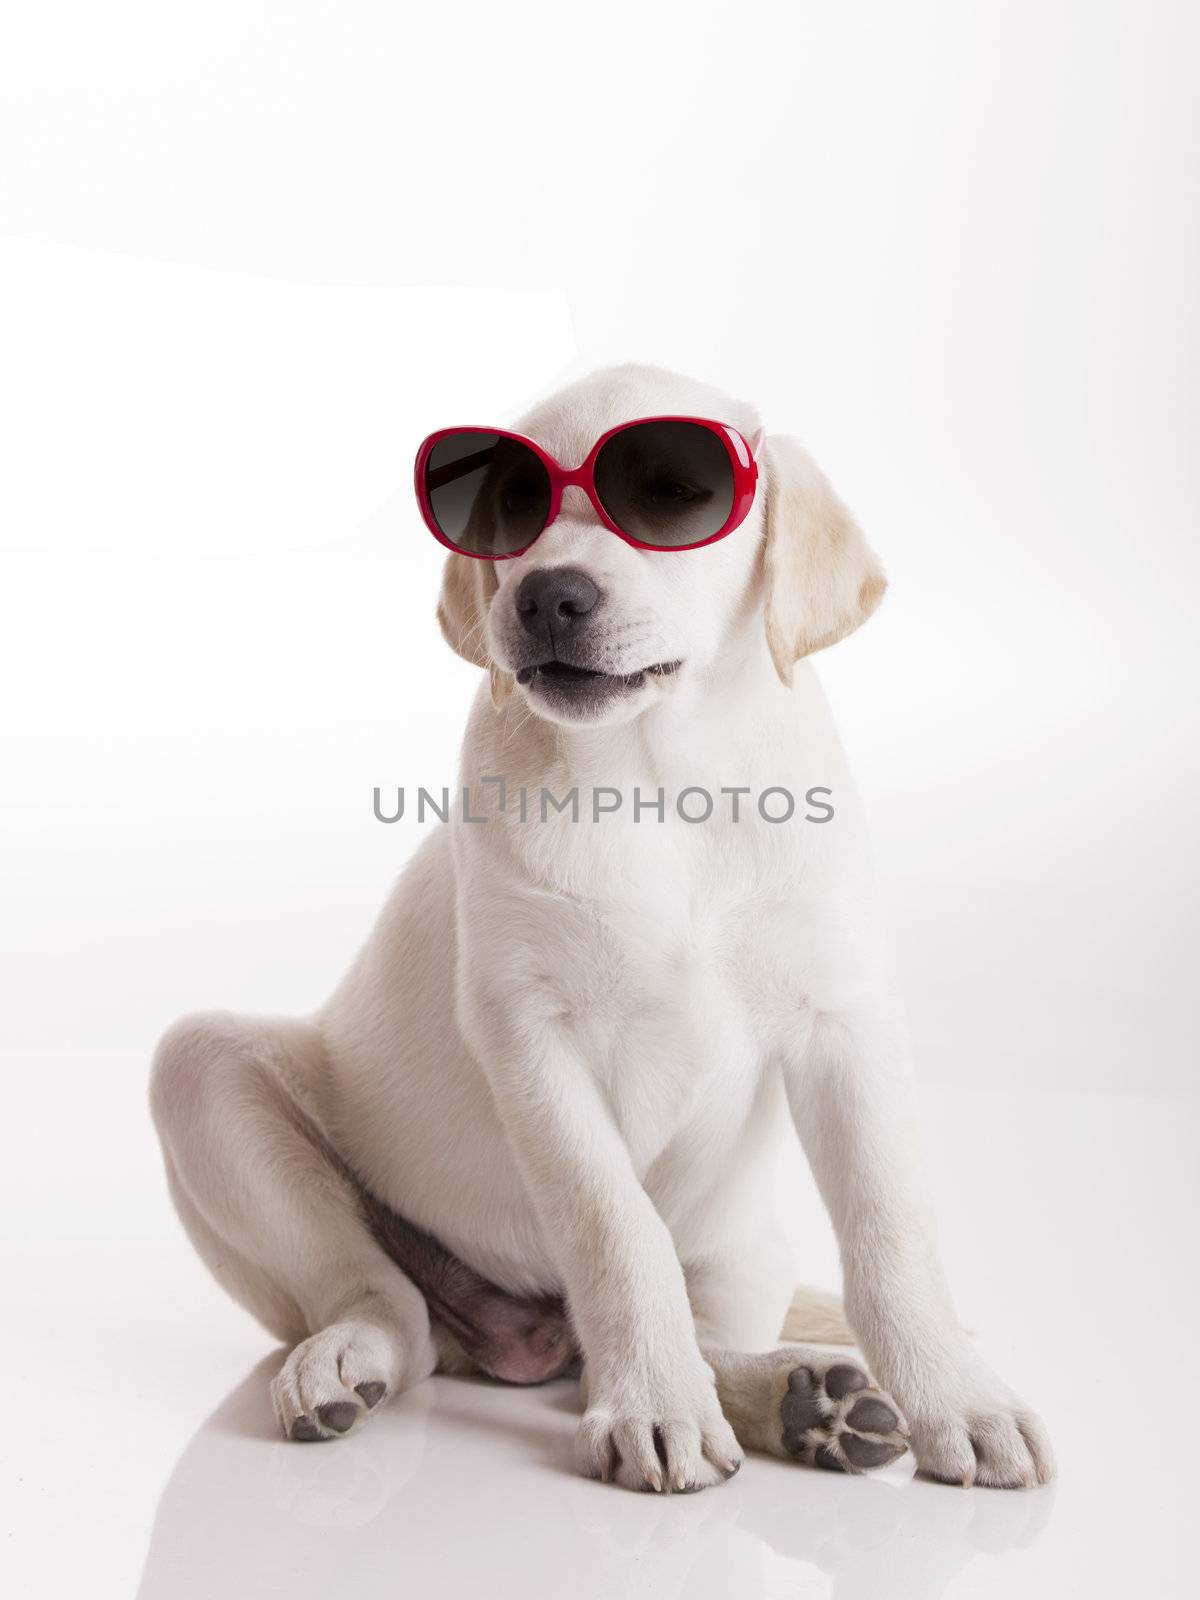 Labrador retriever puppy wearing sunglasses, isolated on white